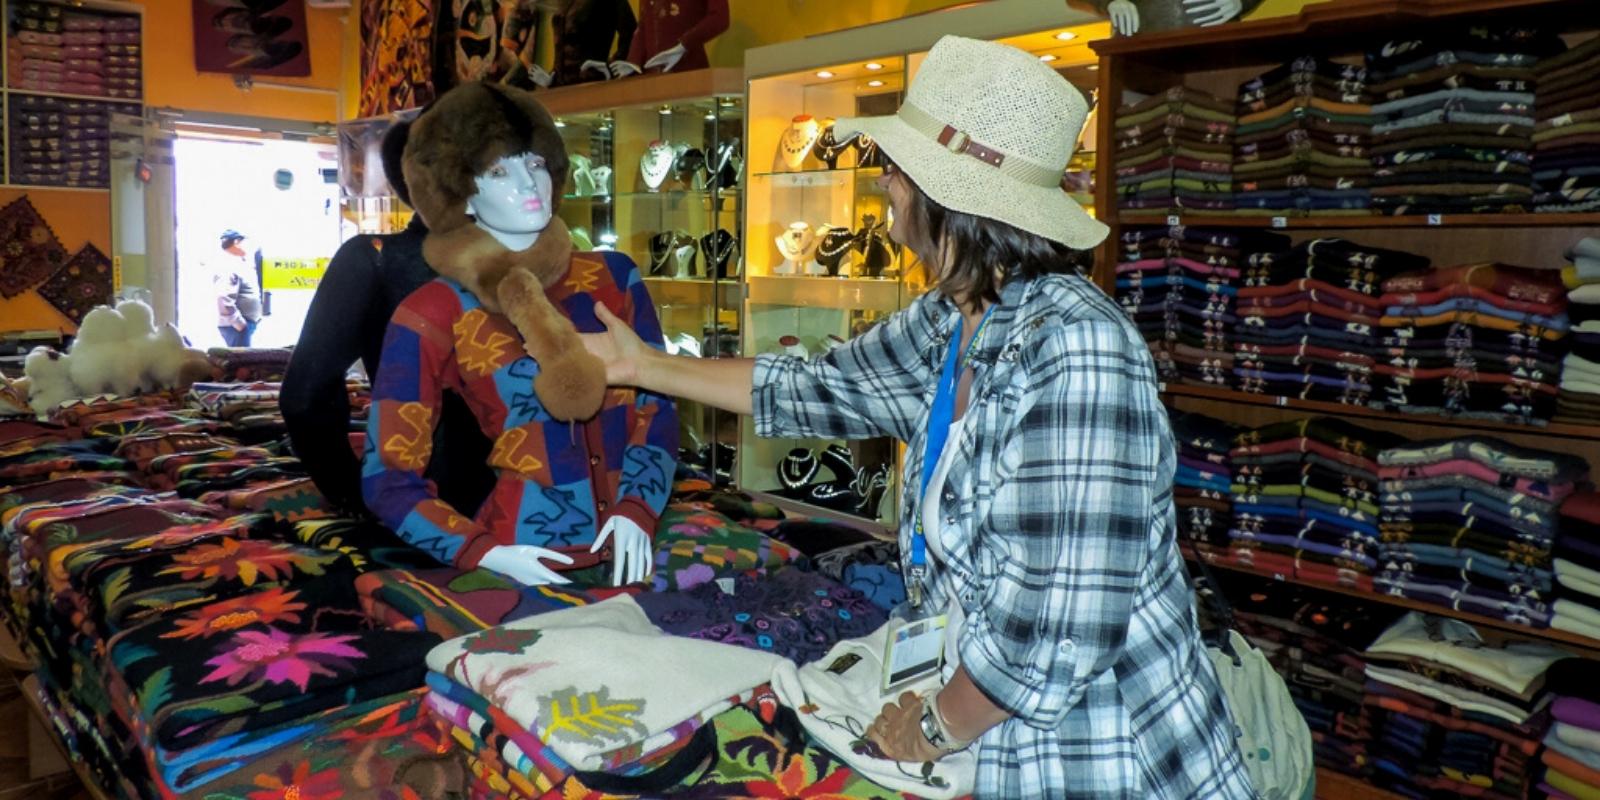 10 best souvenirs of Peru you should to buy , the alpaca clothes